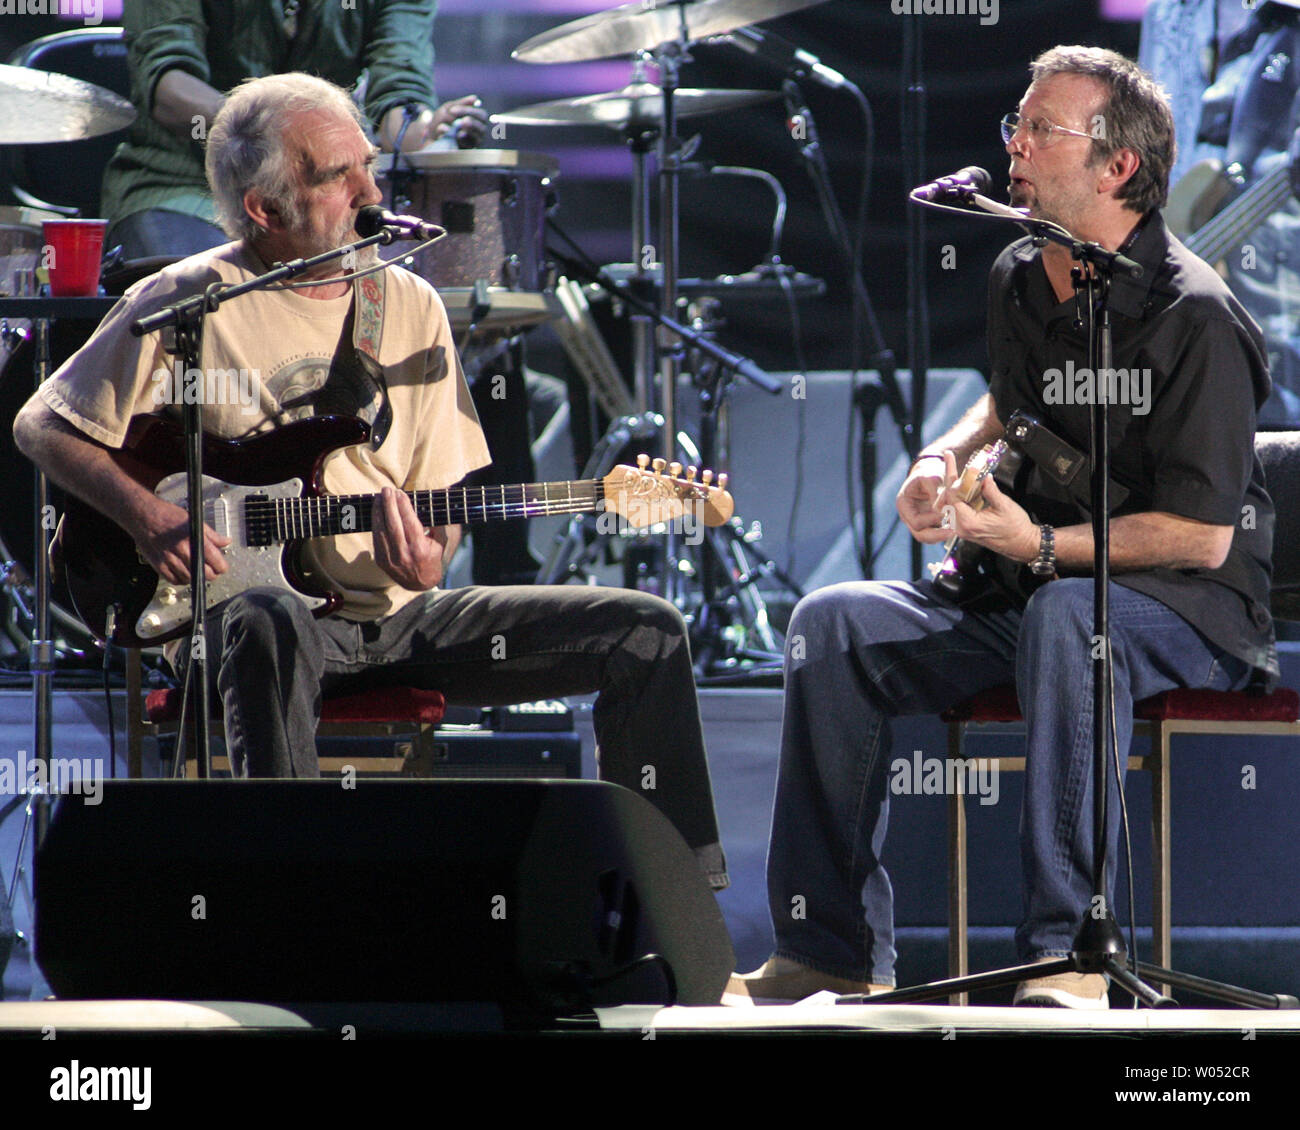 J.J. Cale (L) and Eric Clapton perform in concert at the ipayOne Center in San Diego on March 15, 2007.   (UPI Photo/Roger Williams) Stock Photo